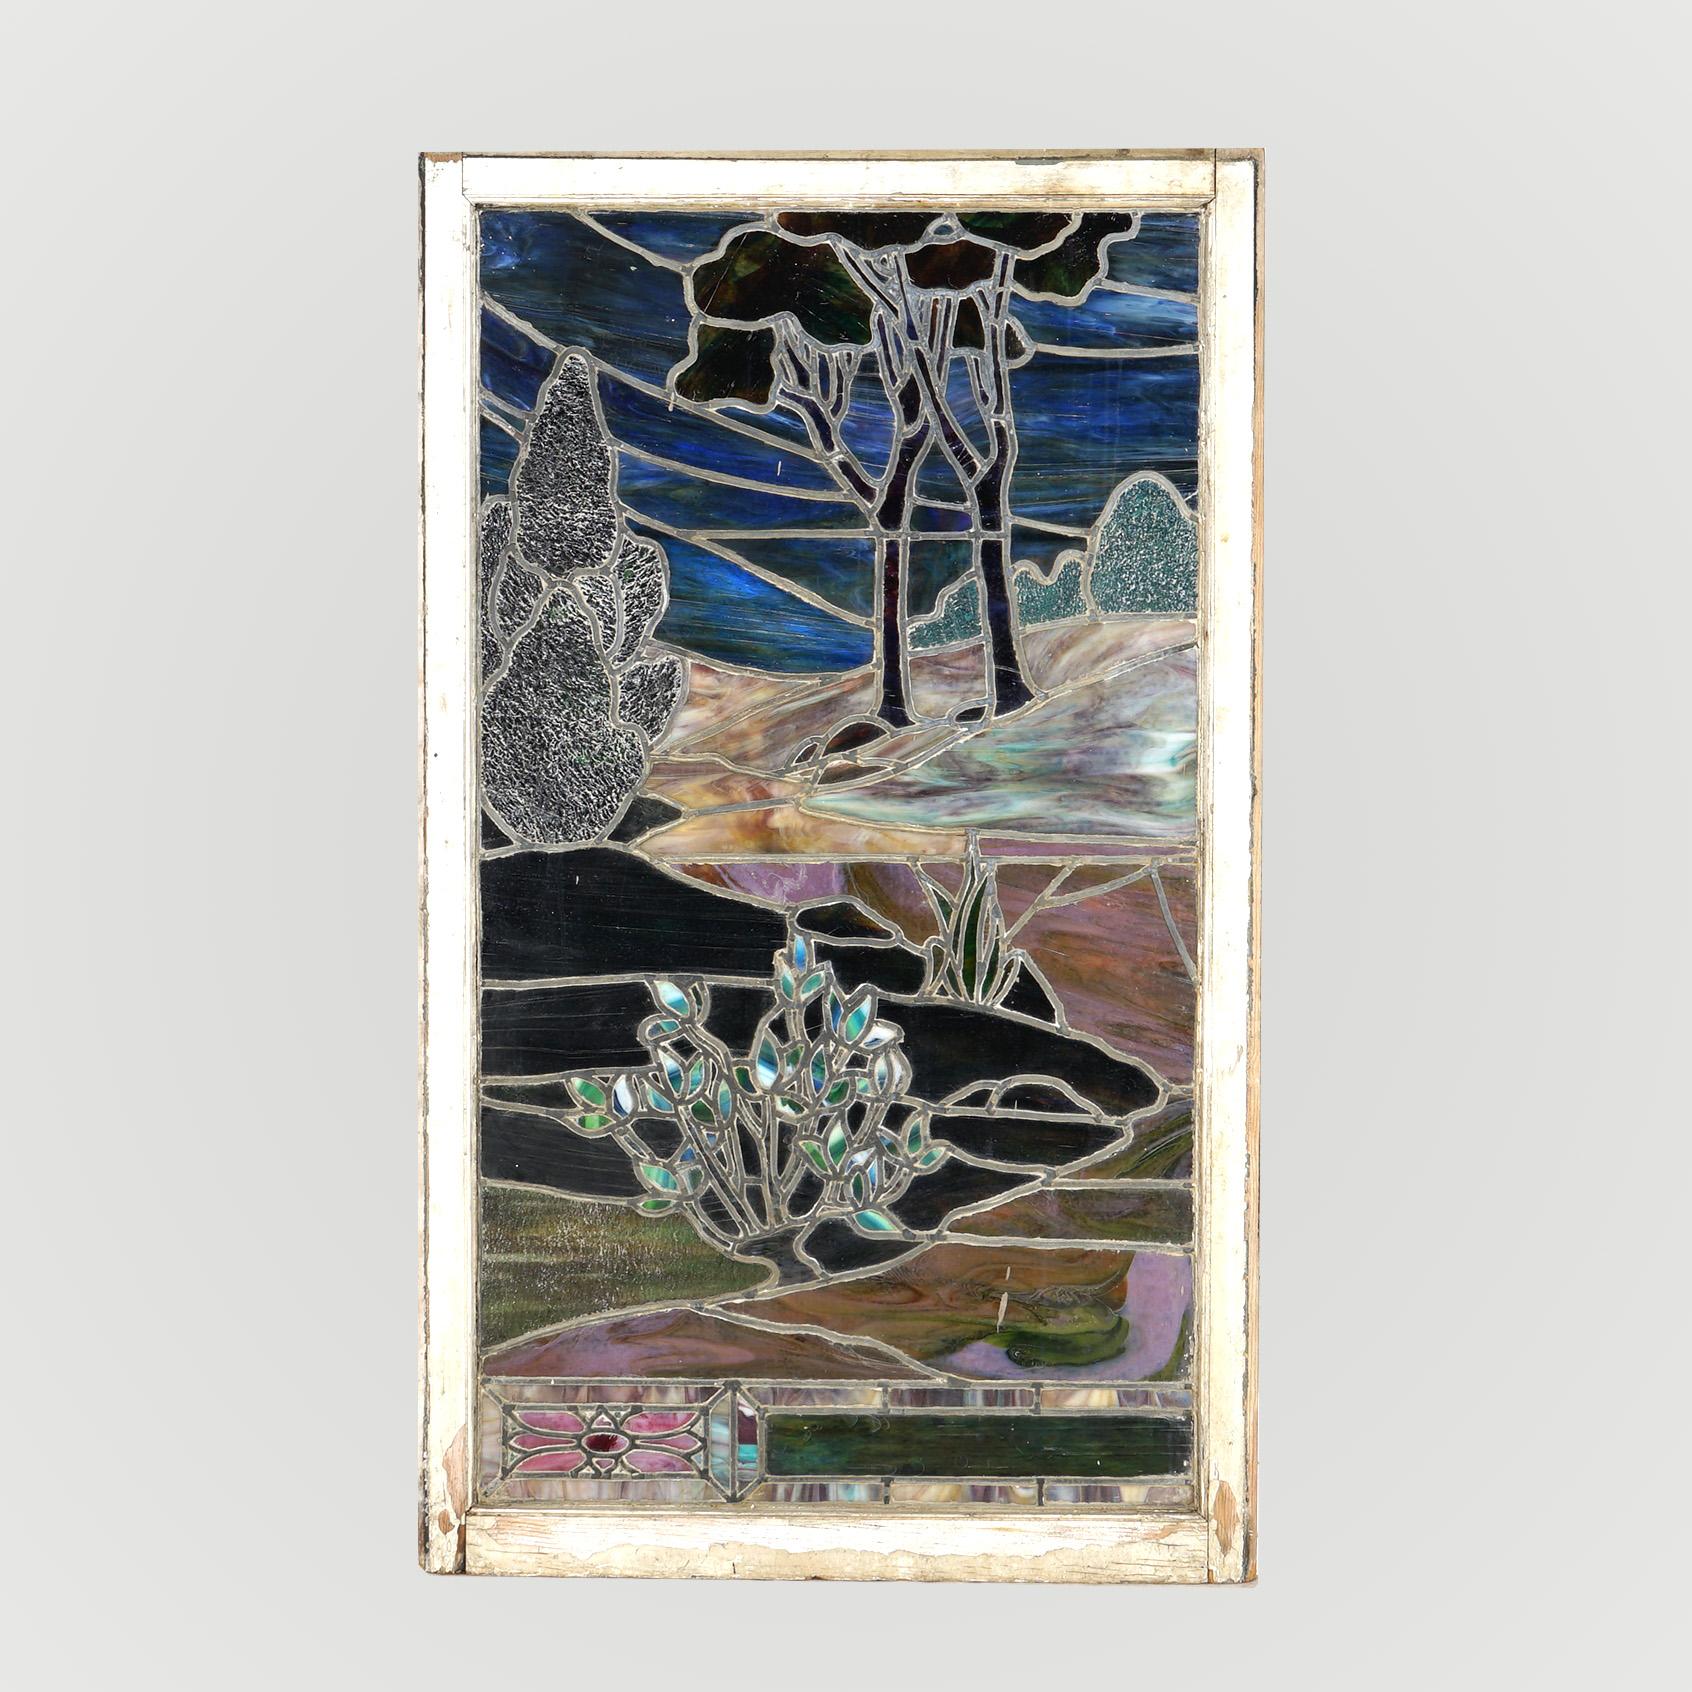 ***Ask About Reduced In-House Shipping Rates - Reliable Service & Fully Insured***

Large Antique Leaded & Stained Layered Glass Window by Haskins with Landscape Scene, Circa 1900 

Measures - 59.75